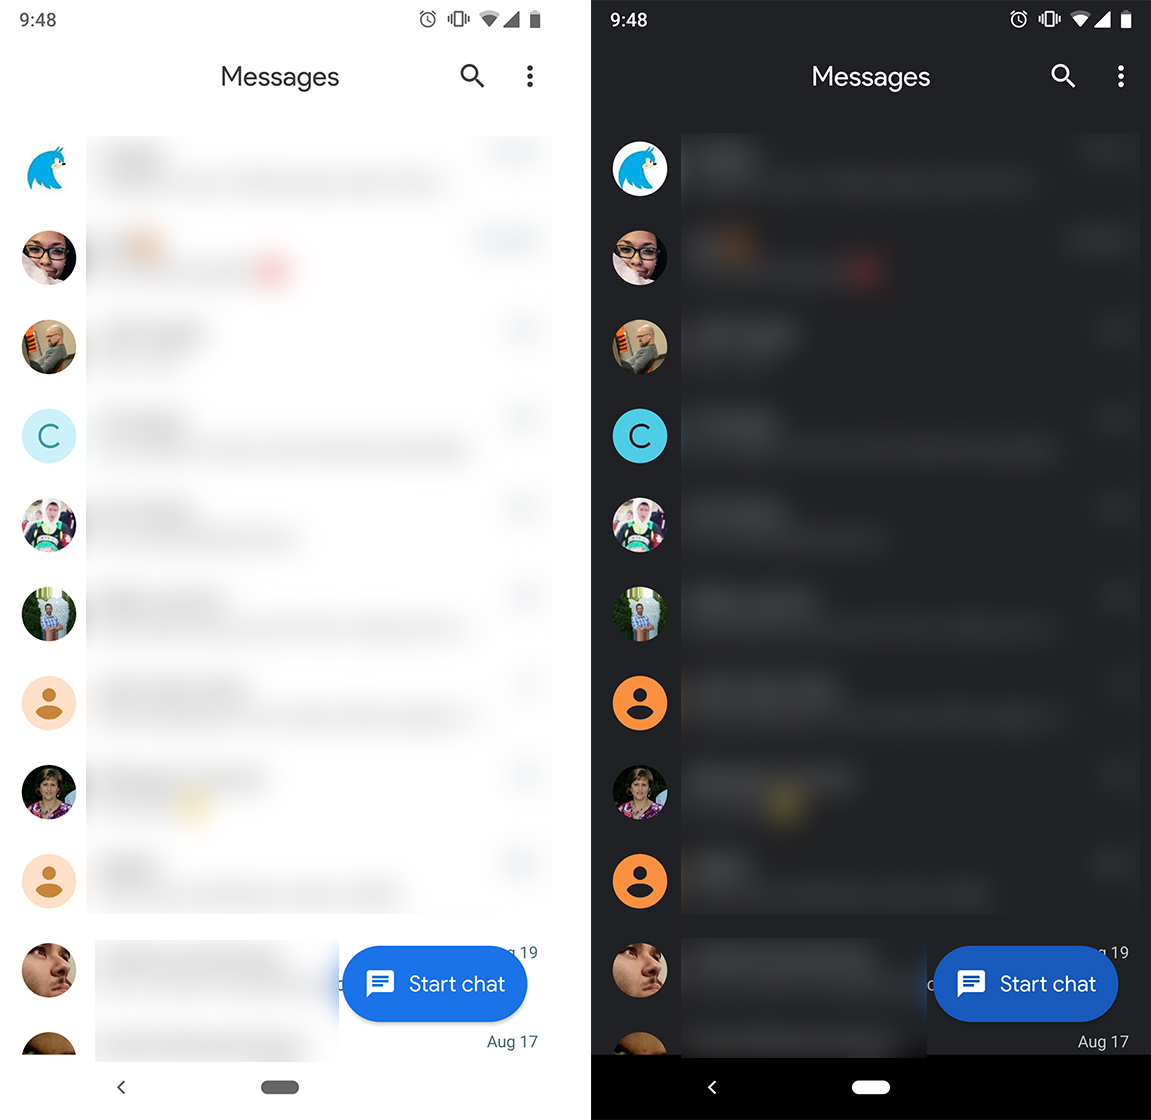 Messages redesign